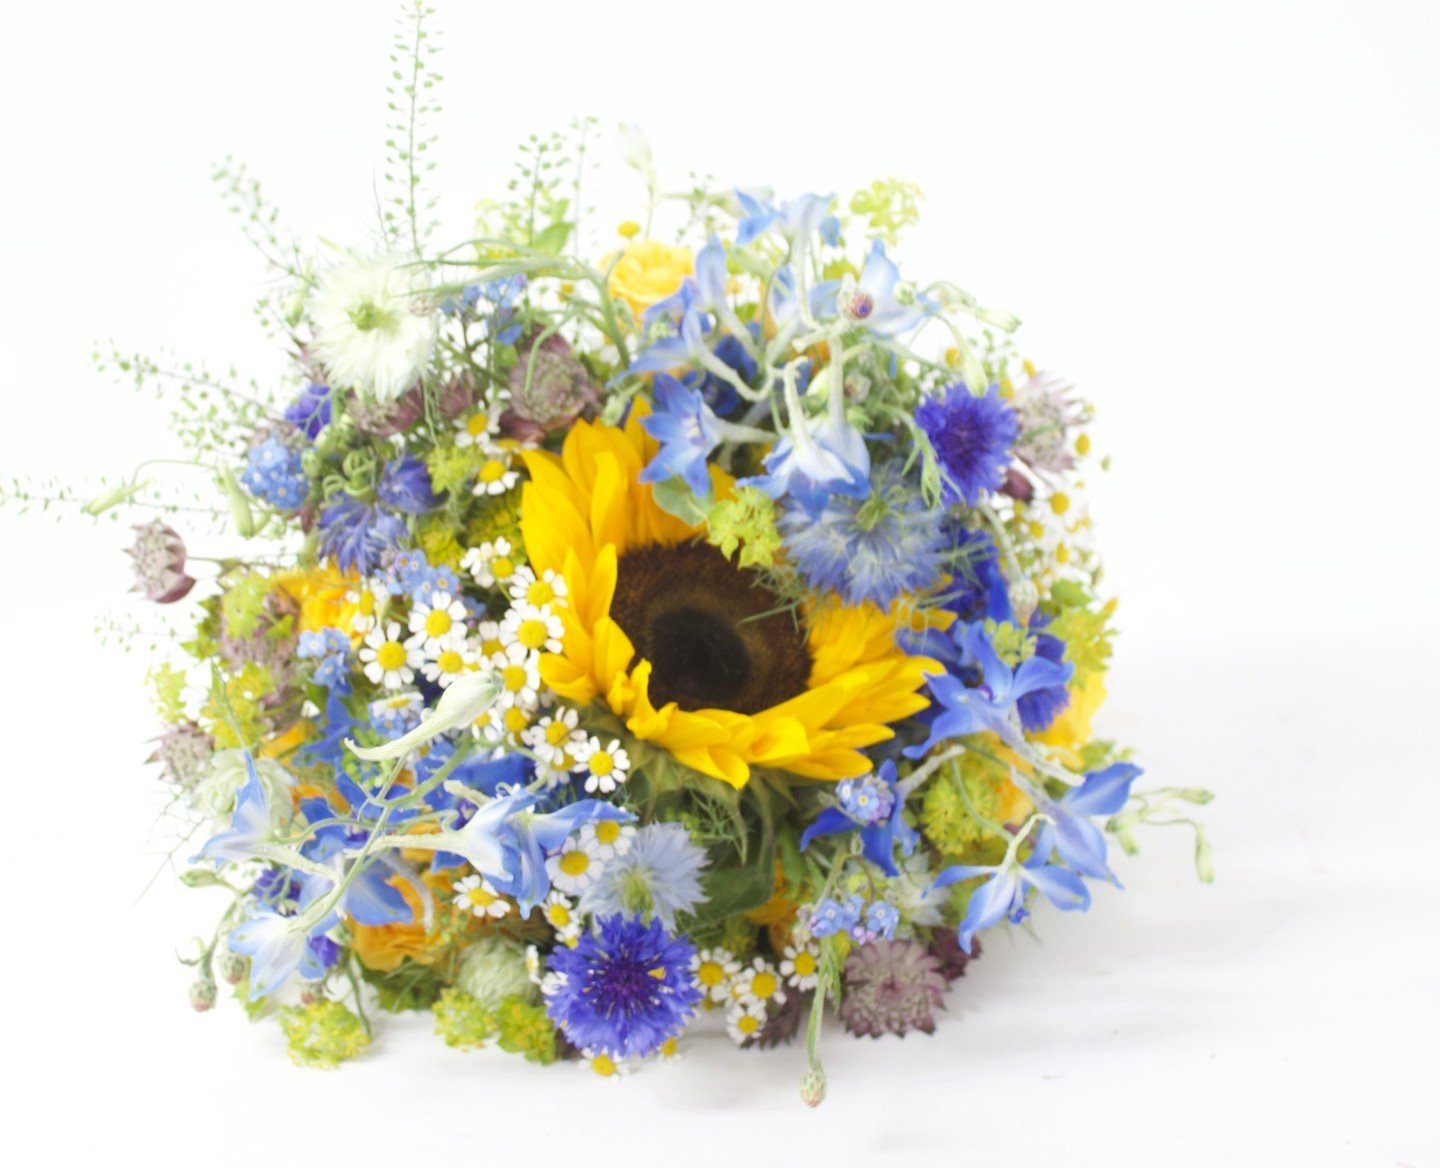 As the sun shines brightly on your special day, so should your bridal bouquet! This season, we're loving the warmth and whimsy of sunflowers in bridal bouquets. Their bright yellow petals and tall, statuesque stems add a playful and joyful touch to a